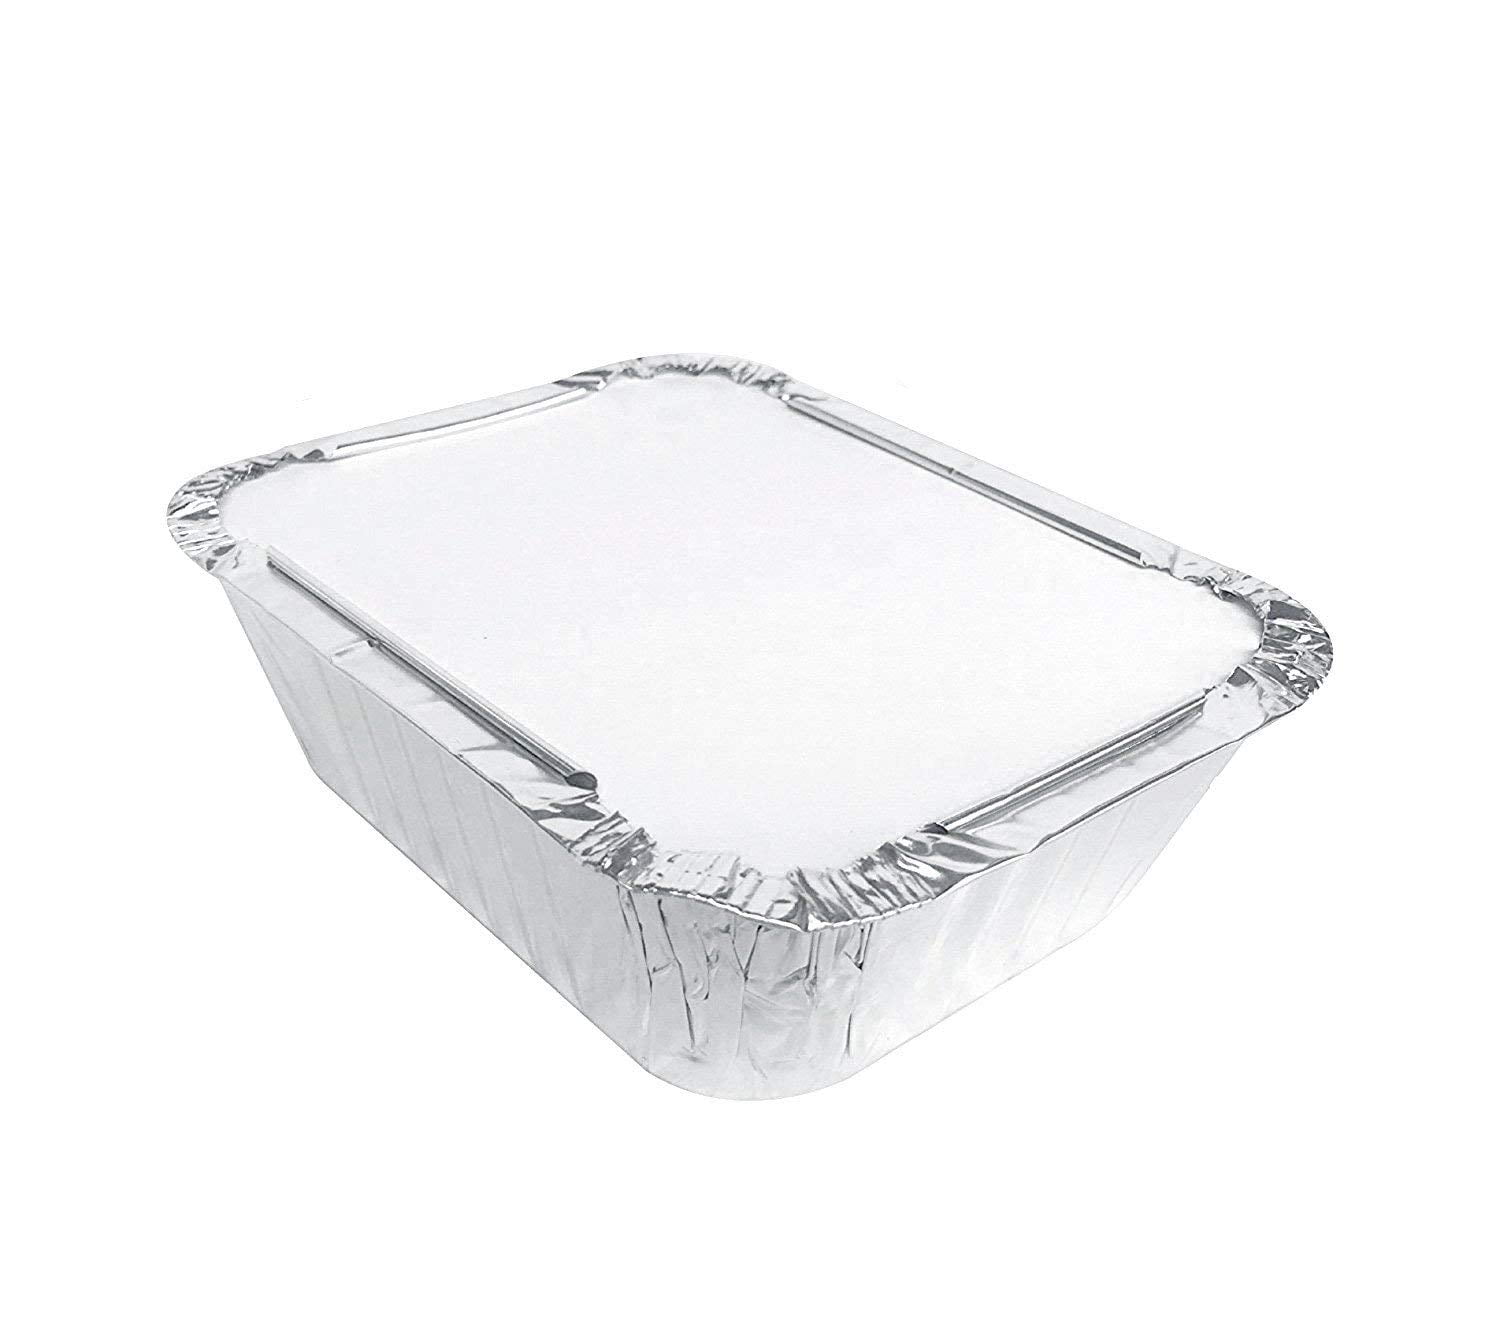 PLASTICPRO Disposable 1 LB Aluminum Takeout Tin Foil Baking Pans 5'' X 6''  X 2'' Inch Bakeware - Cookware Perfect for Baking Cakes,Brownies,Bread